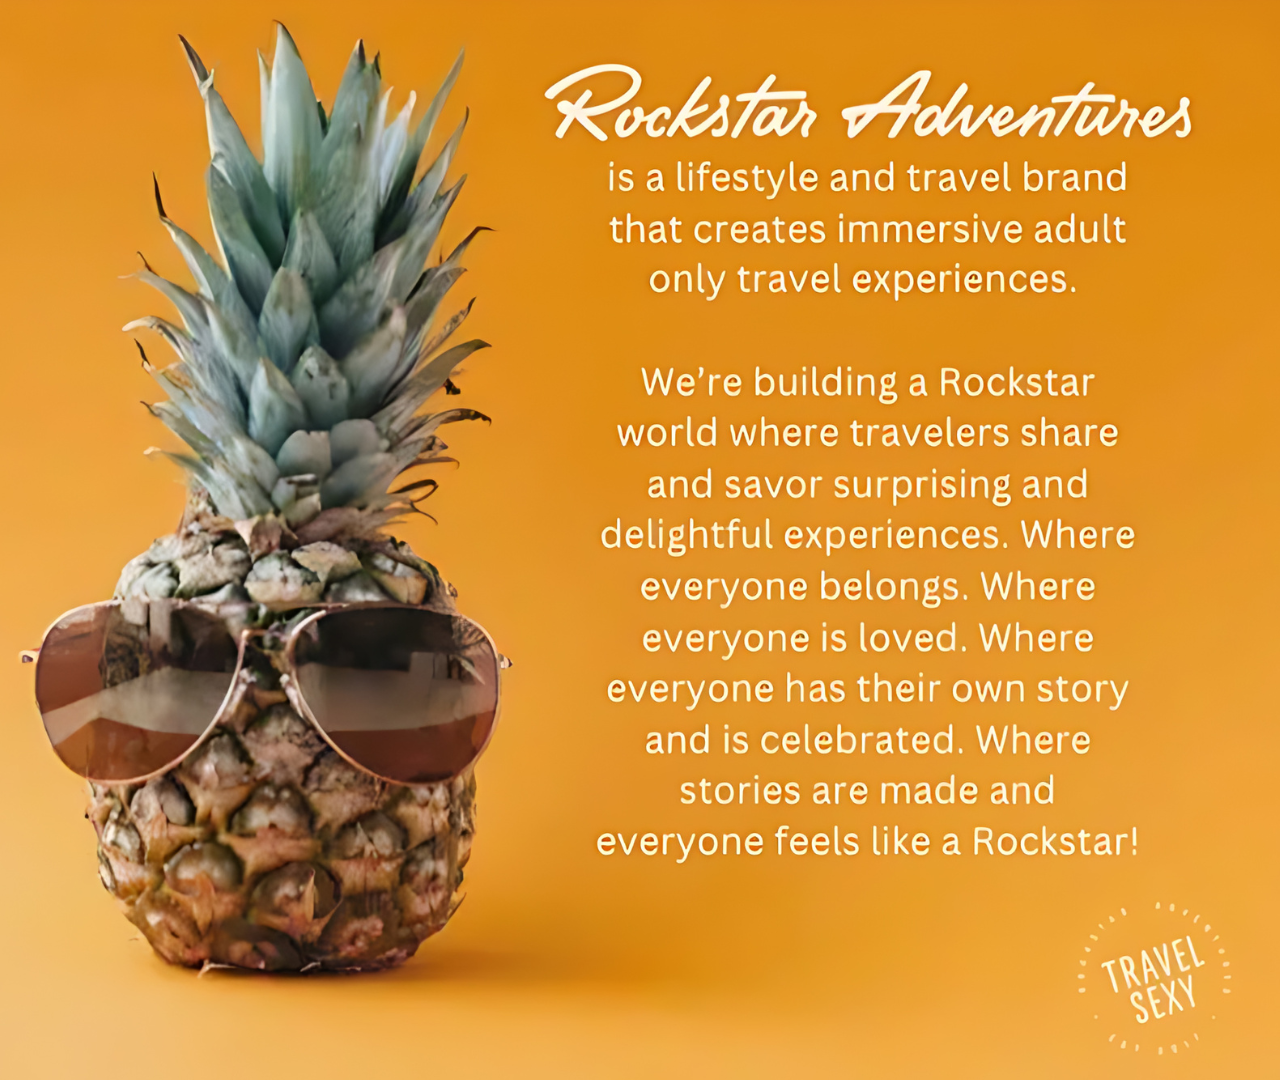 Rockstar Adventures is a lifestyle and travel brand